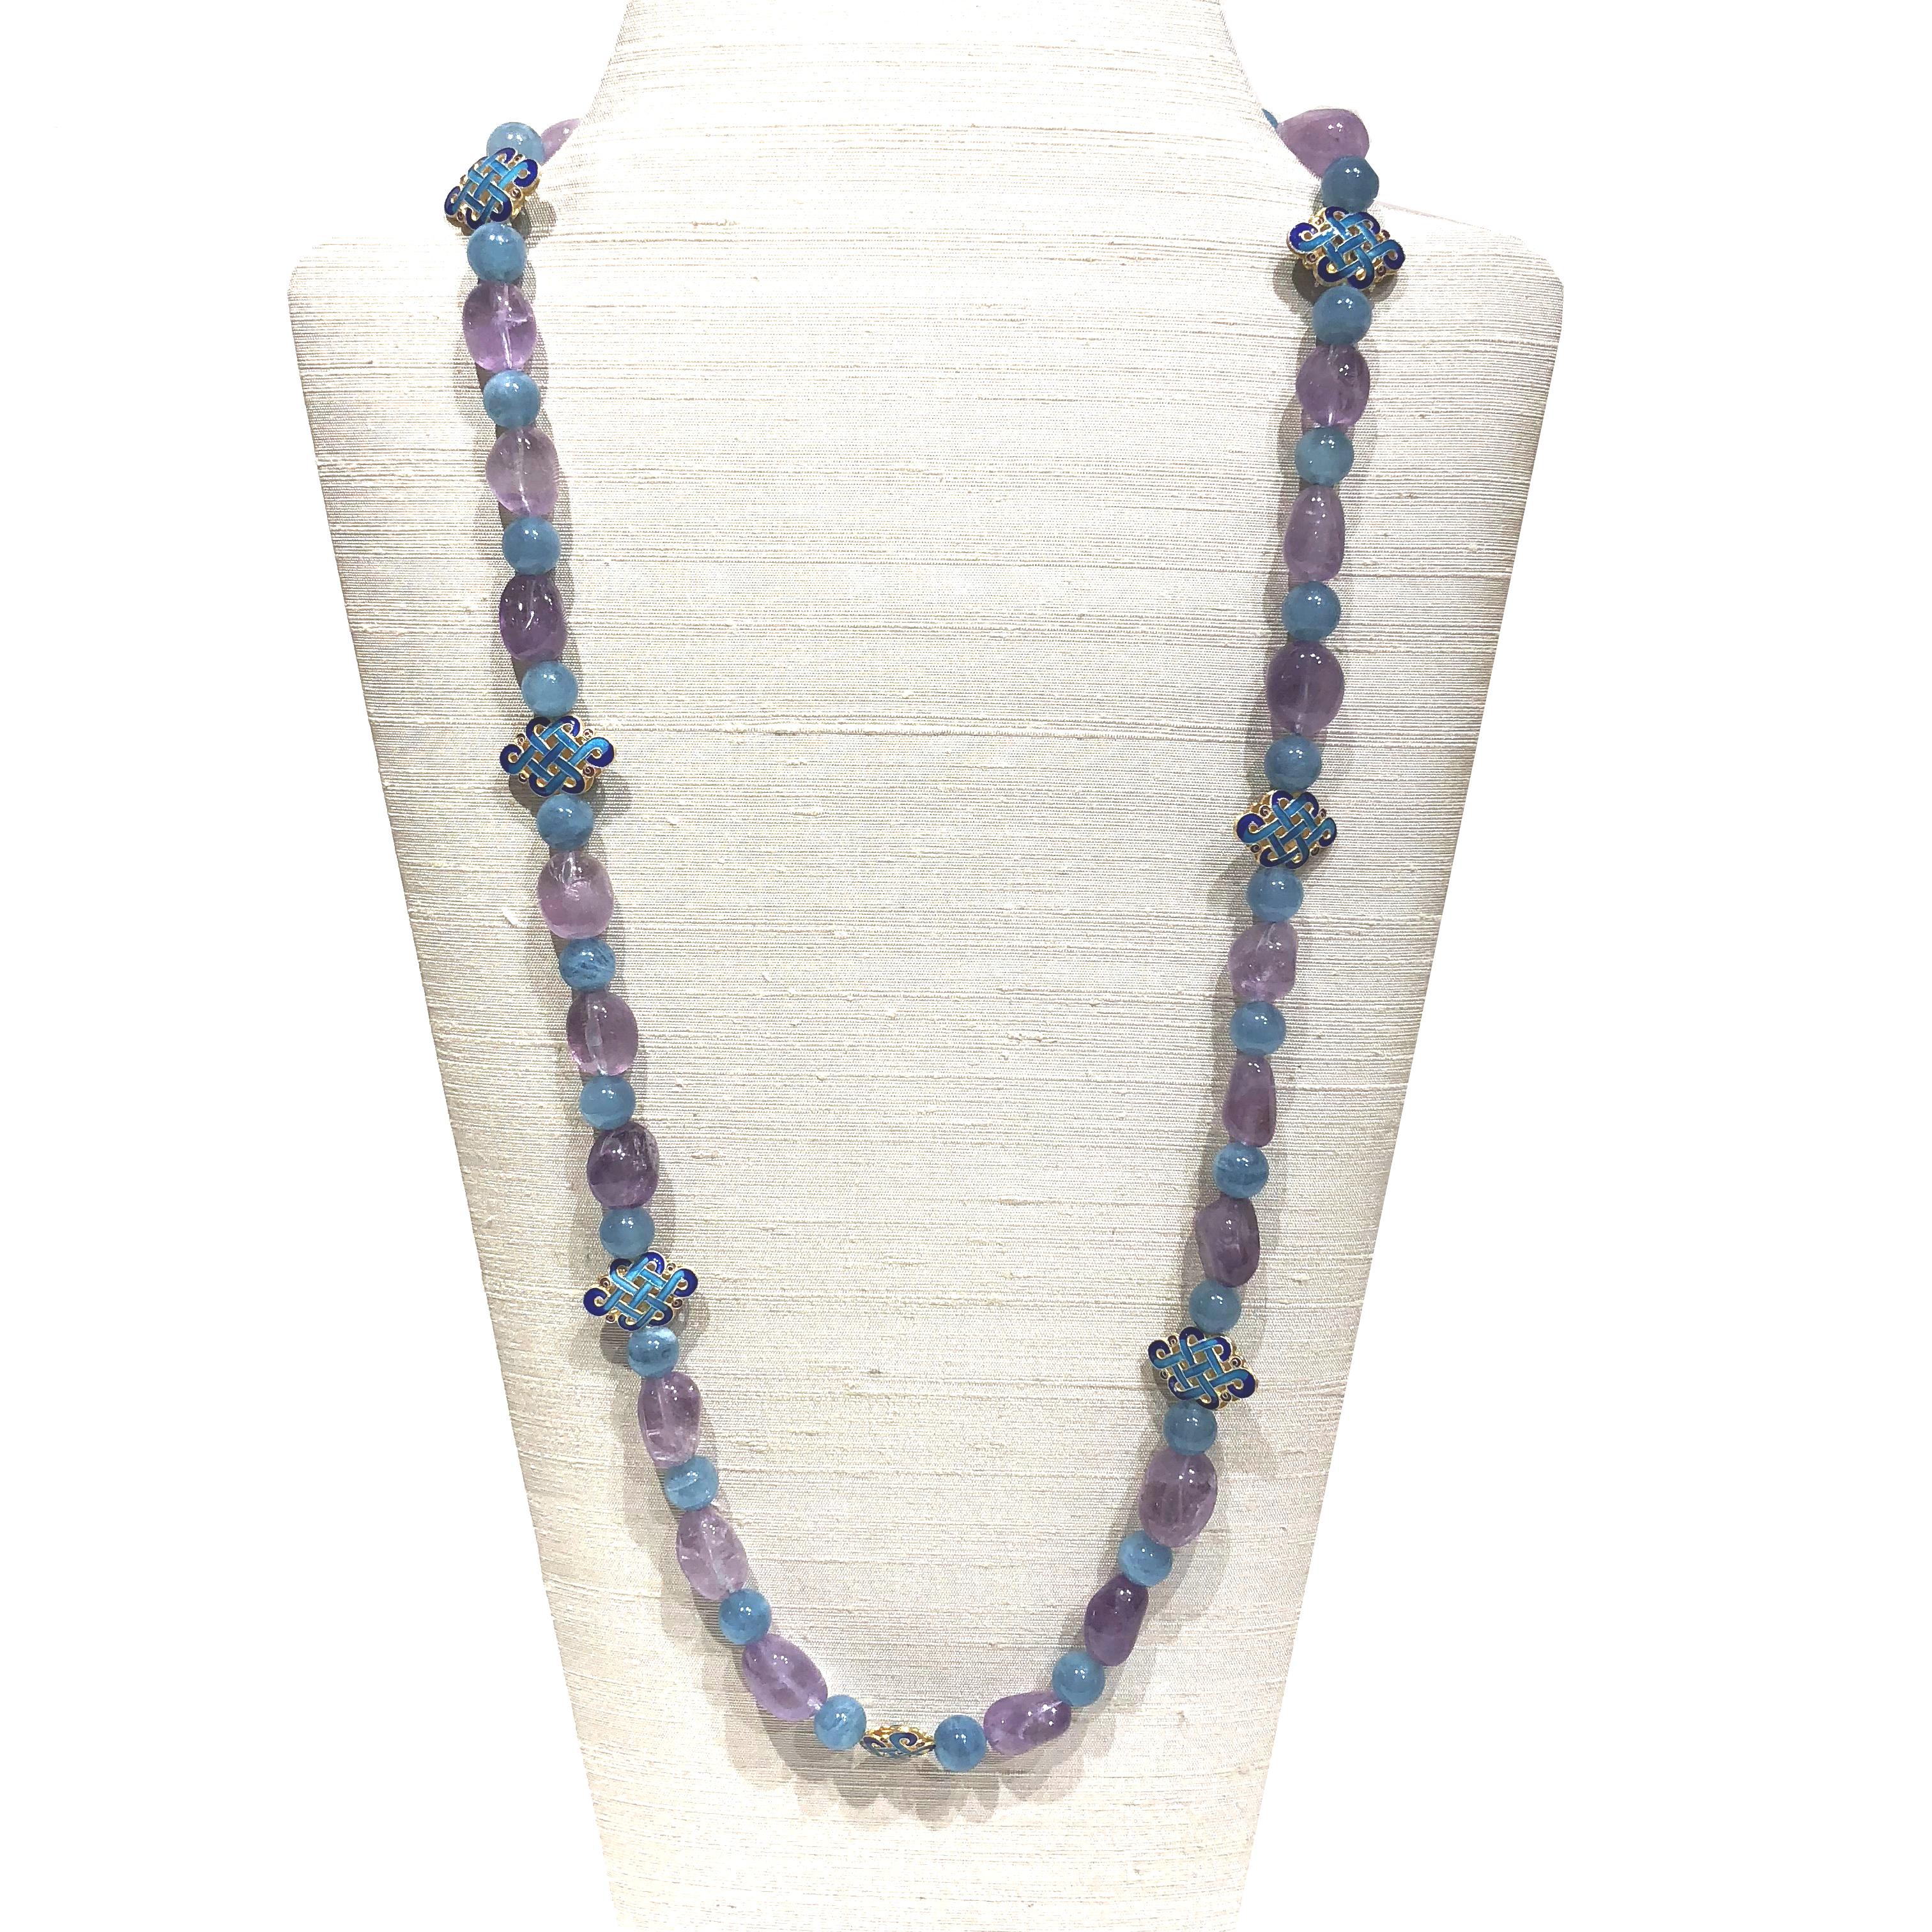 32.25 in (82 cm) long necklace with amethyst, aquamarine and Cloisonné vermeil knot beads 

For those who love Chinoiserie style, the colours of amethyst and aquamarine make a perfect match with the vermeil beads, in the form of endless knots